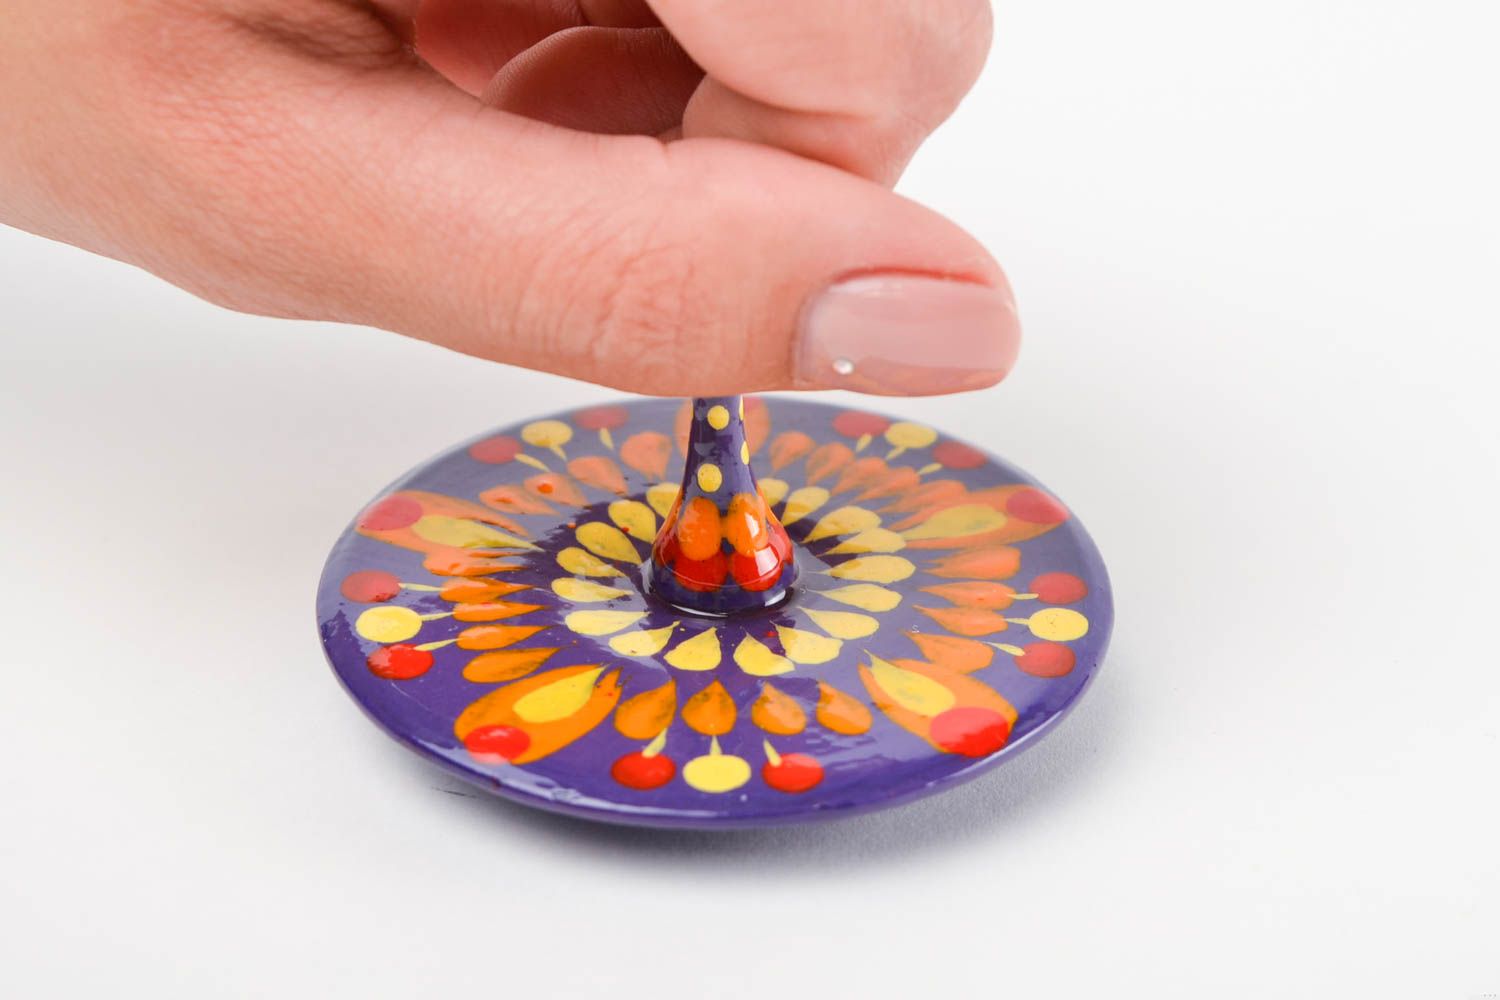 Unusual handmade wooden smart toy spinning top spin top birthday gift ideas photo 2